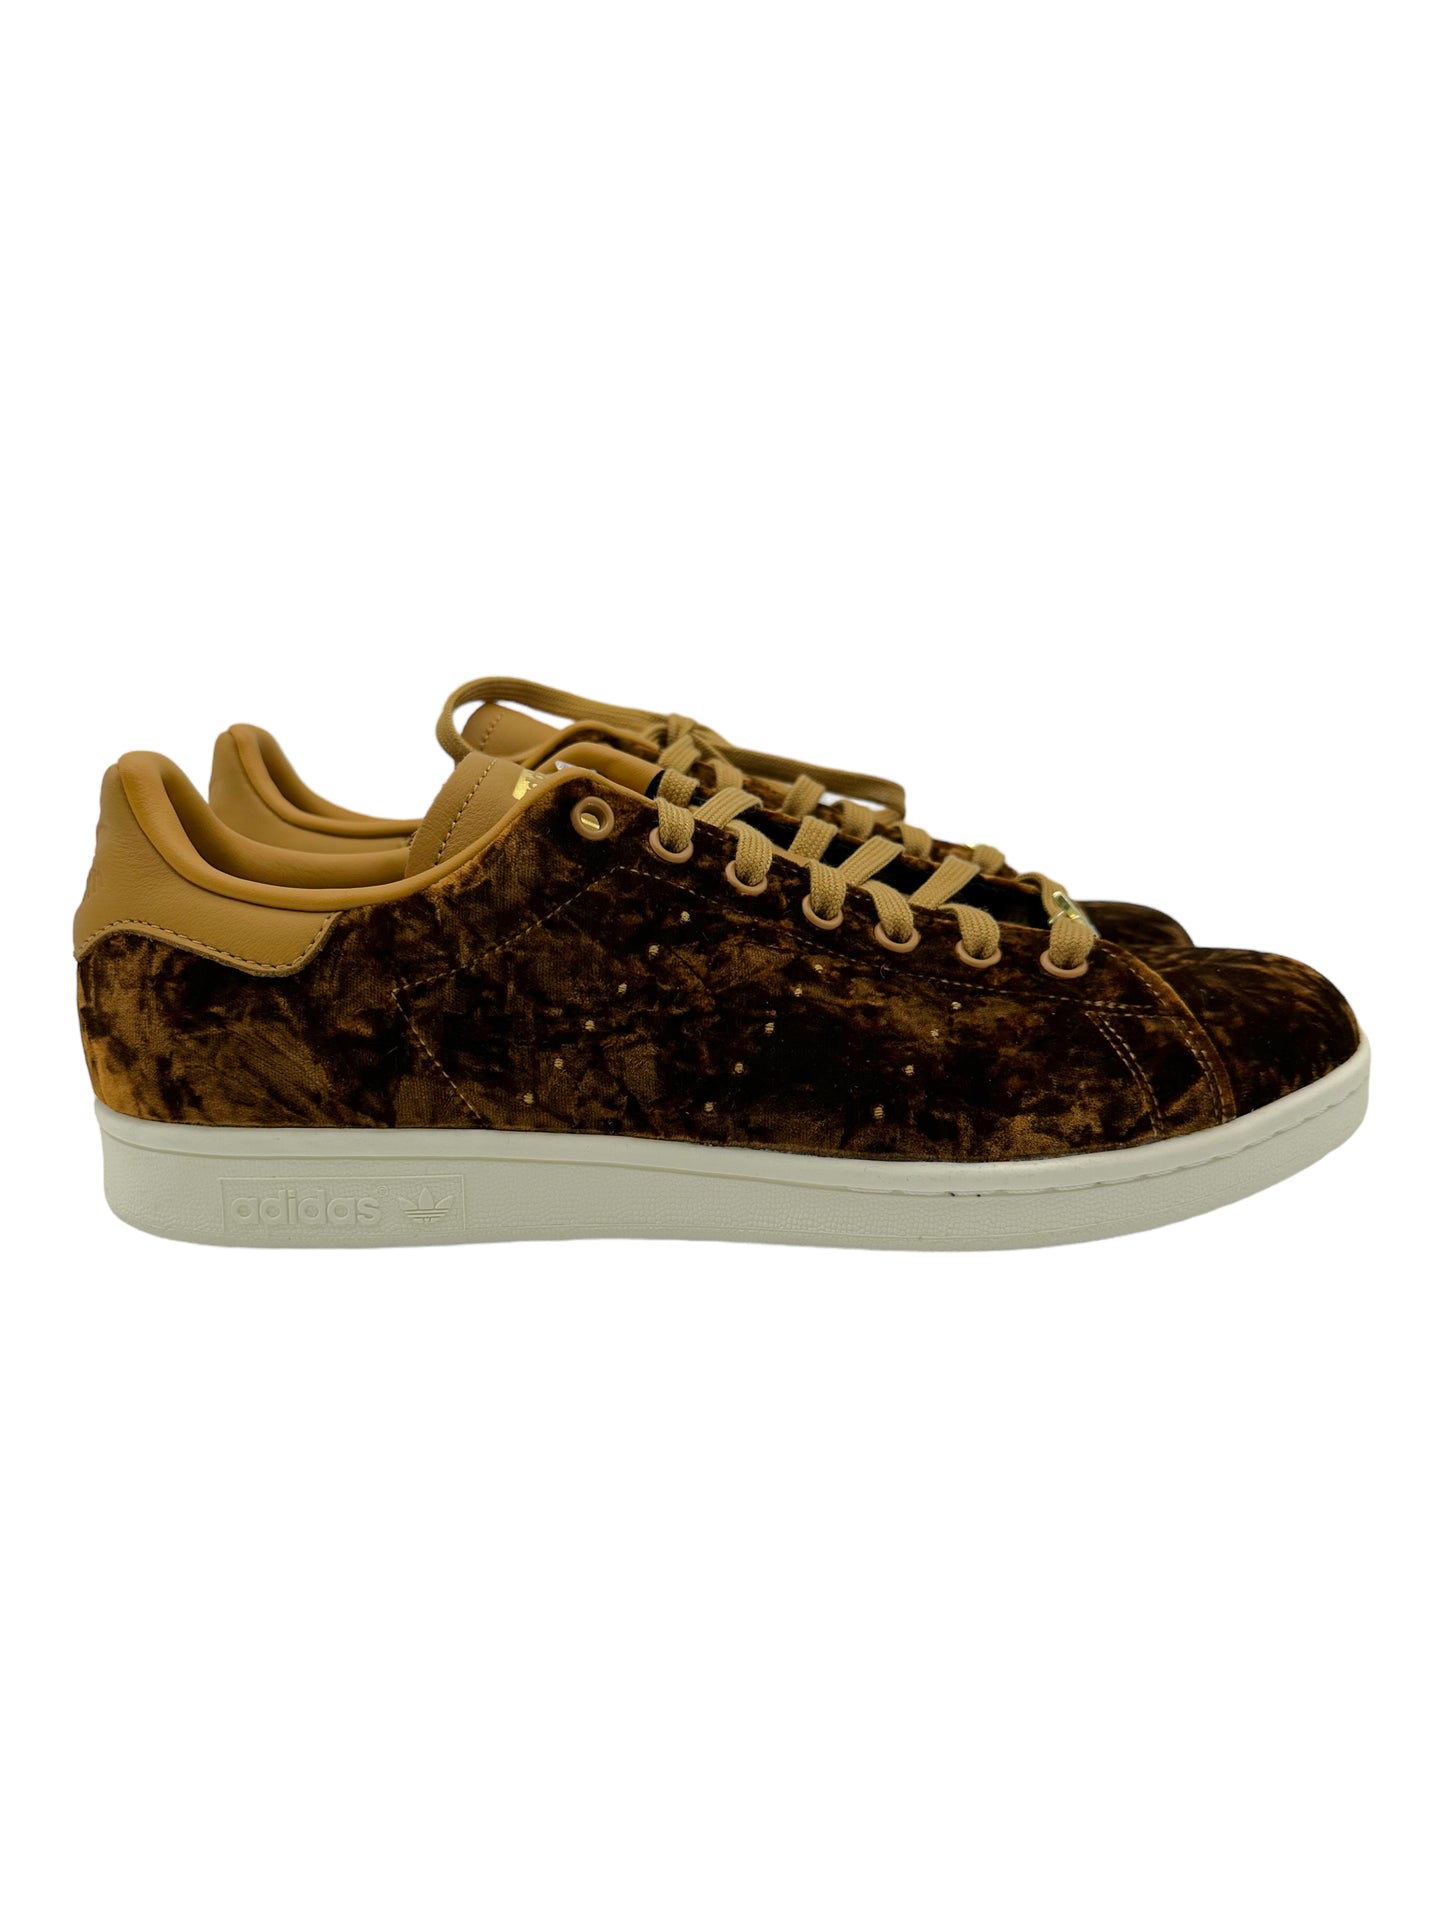 Adidas Stan Smith Mesa Velvet Pack Sneakers - Genuine Design Luxury Consignment for Men. New & Pre-Owned Clothing, Shoes, & Accessories. Calgary, Canada